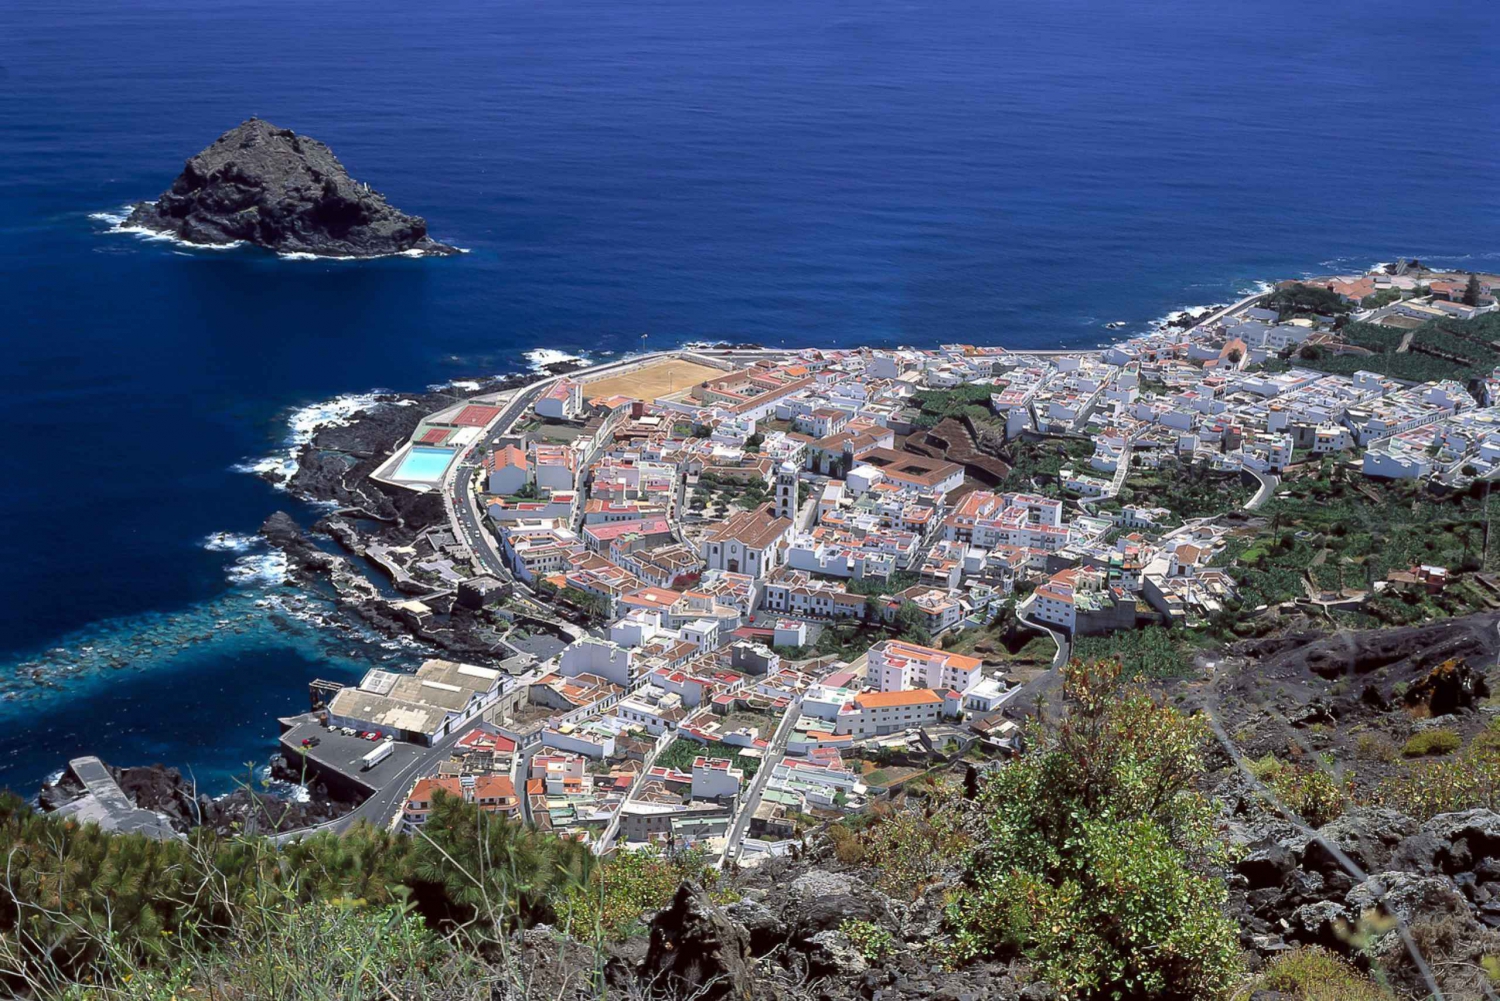 Tenerife: Teide National Park Full-Day Tour with Pickup